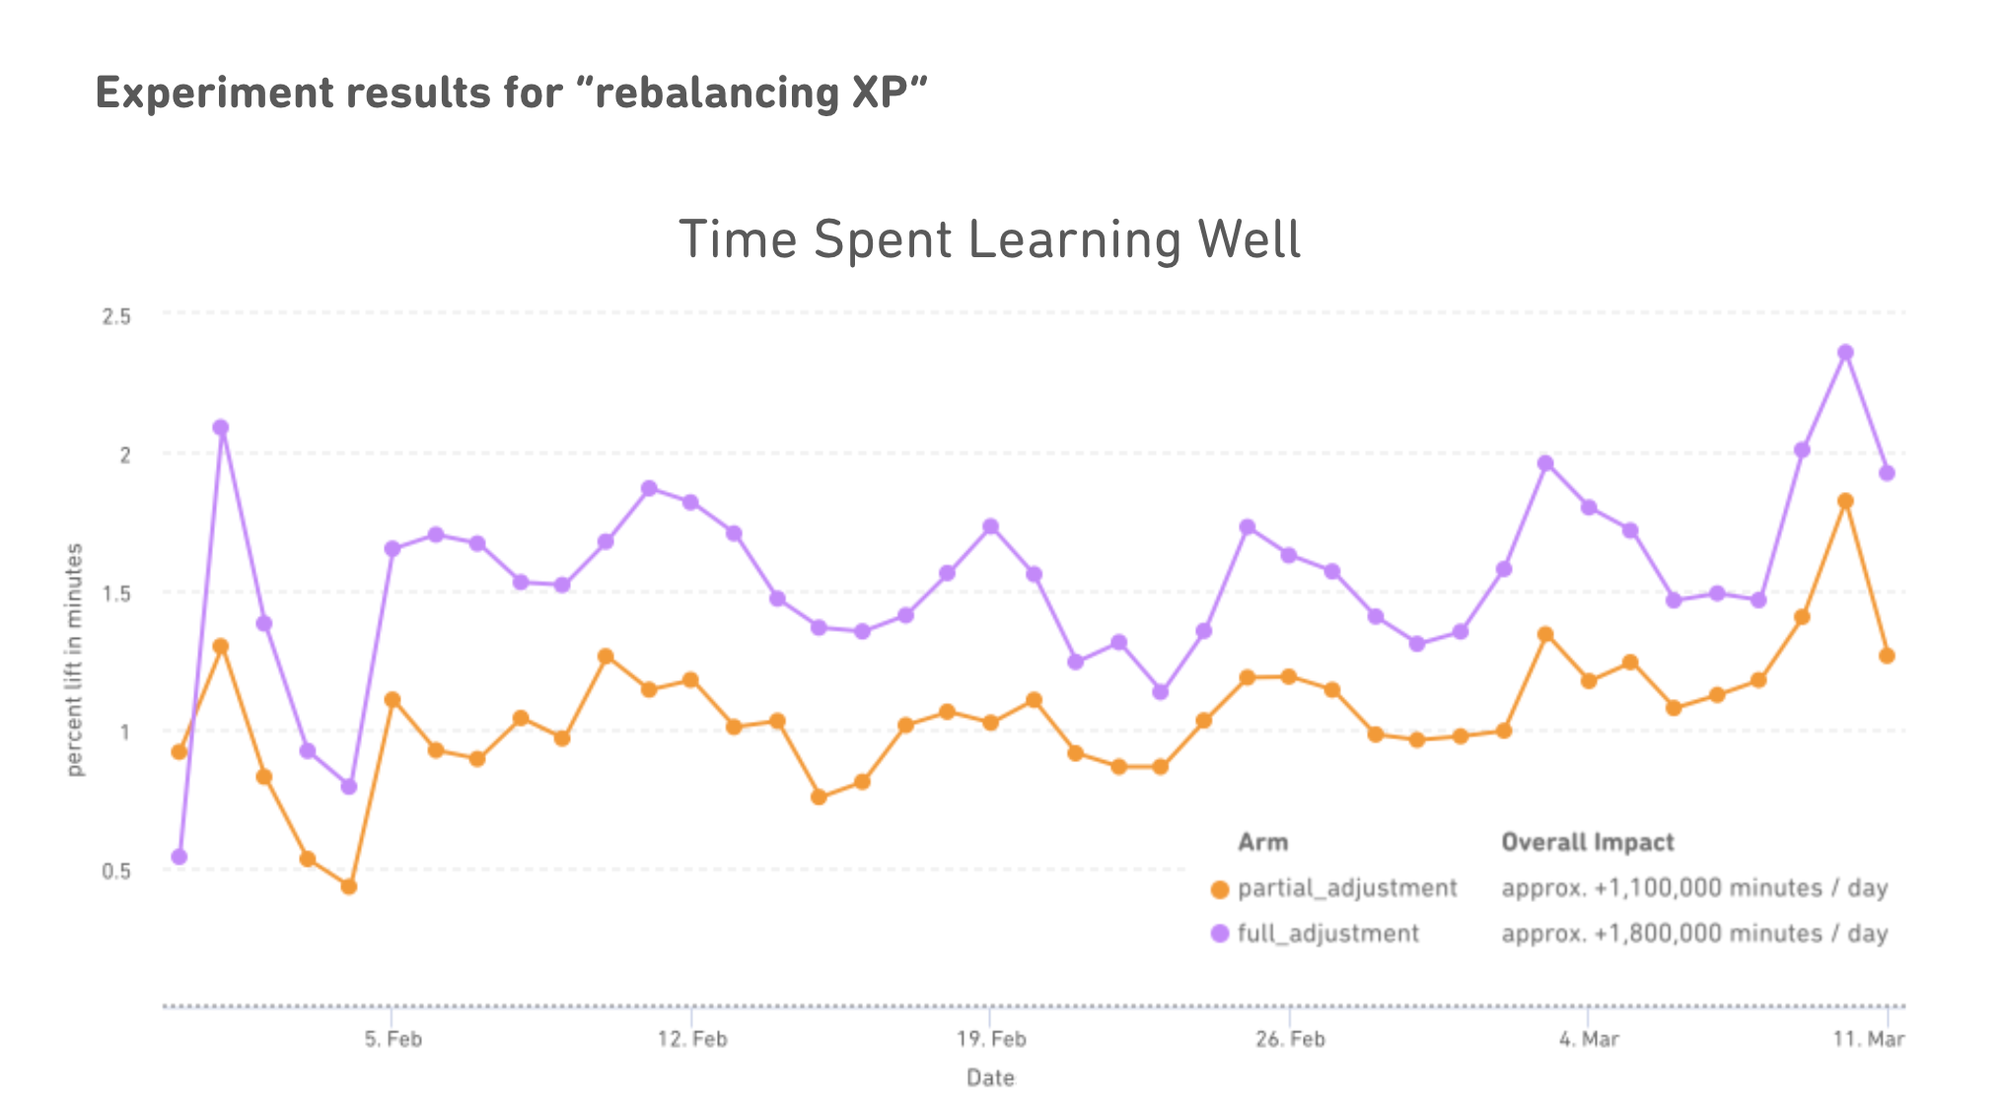 A graph showing the percent lift of the rebalancing XP experiment. Partial adjustment resulted in approximately +1.1M minutes/day, and the full adjustment resulted in approximately +1.8M minutes/day.